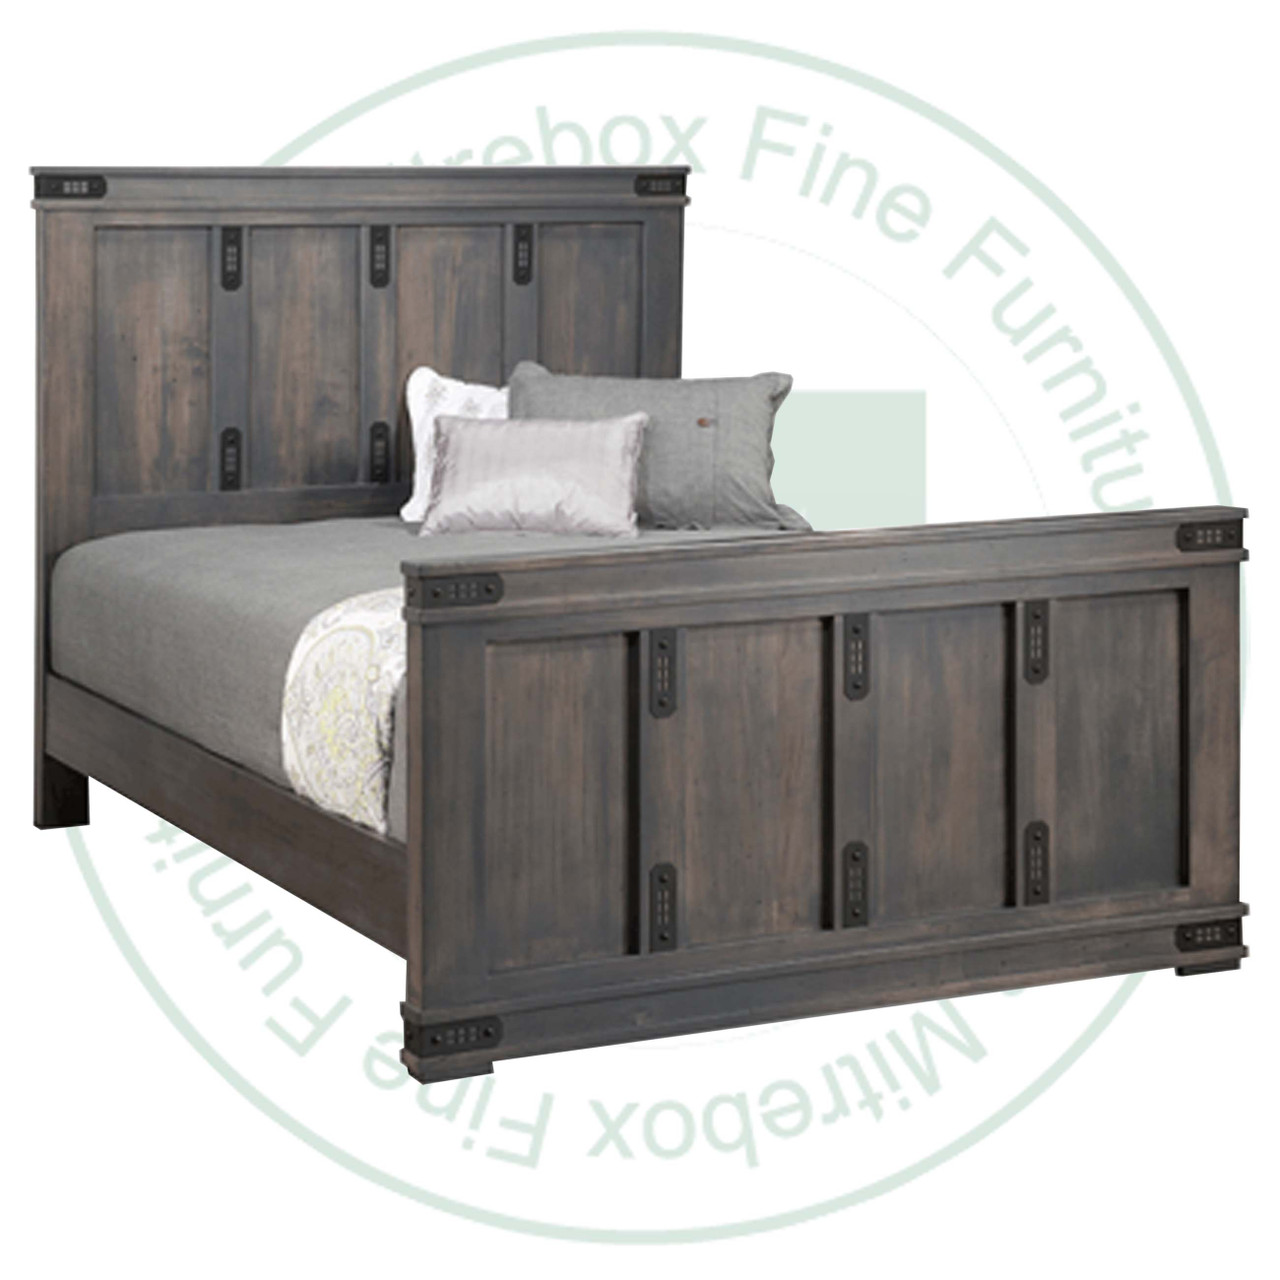 Maple Gastown King Bed Complete With High Footboard Headboard 58'' Footboard 32''